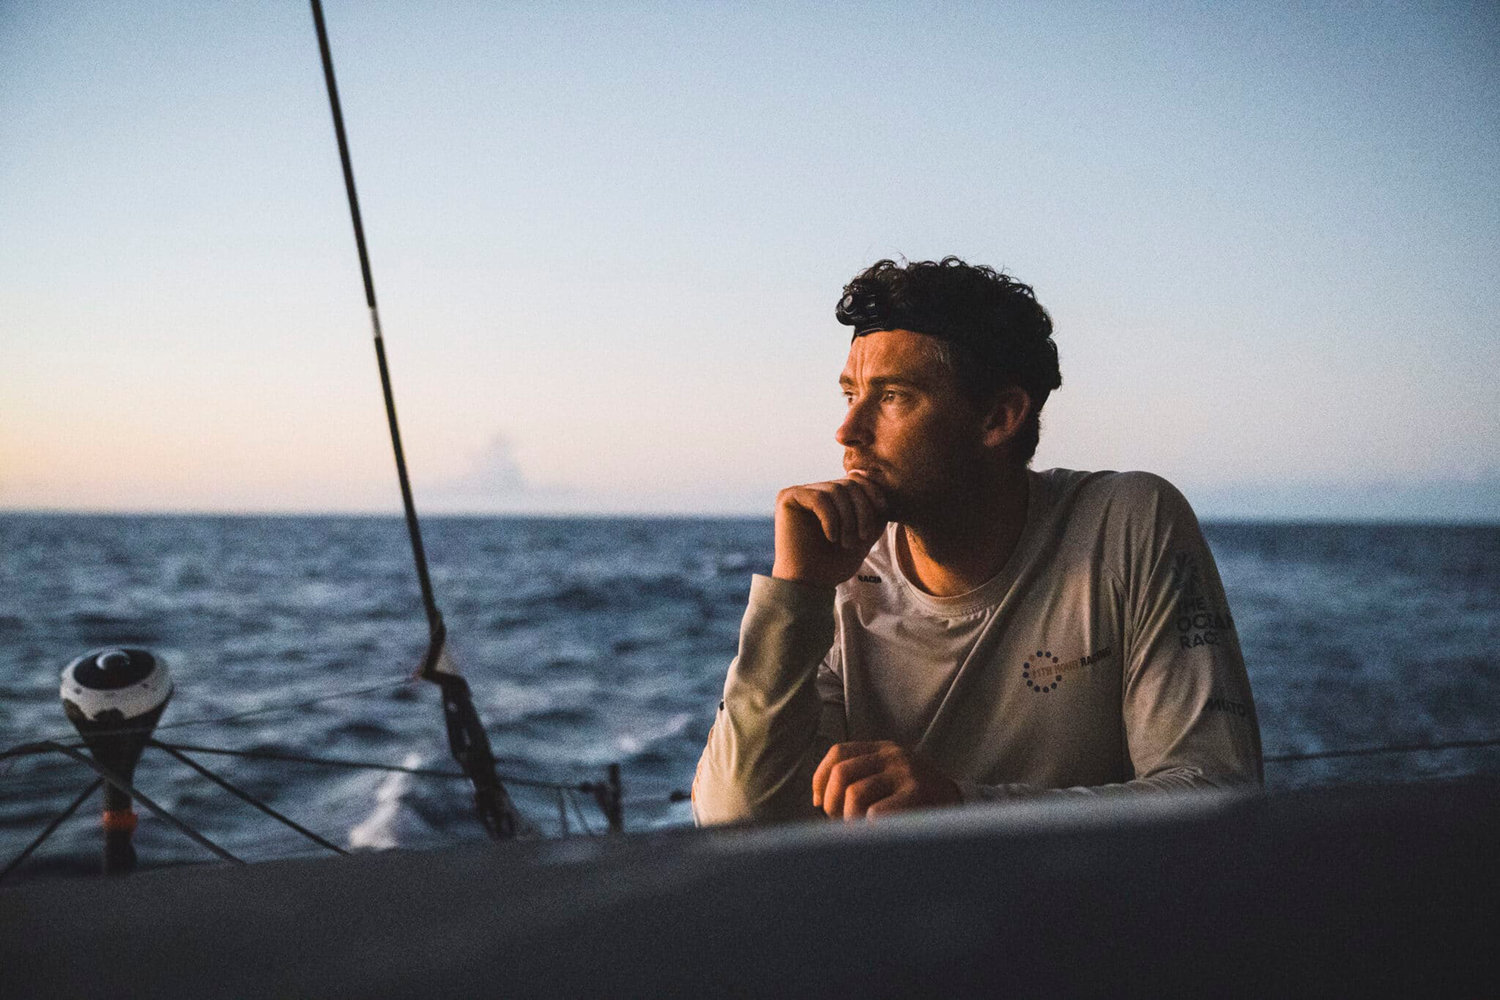 02 February 2023, Onboard 11th Hour Racing Team during Leg 2 from Sao Vicente, Cabo Verde, to Cape Town, South Africa...Jack Bouttell sticks his head out of the hatch for a moment of fresh air at the day’s end.